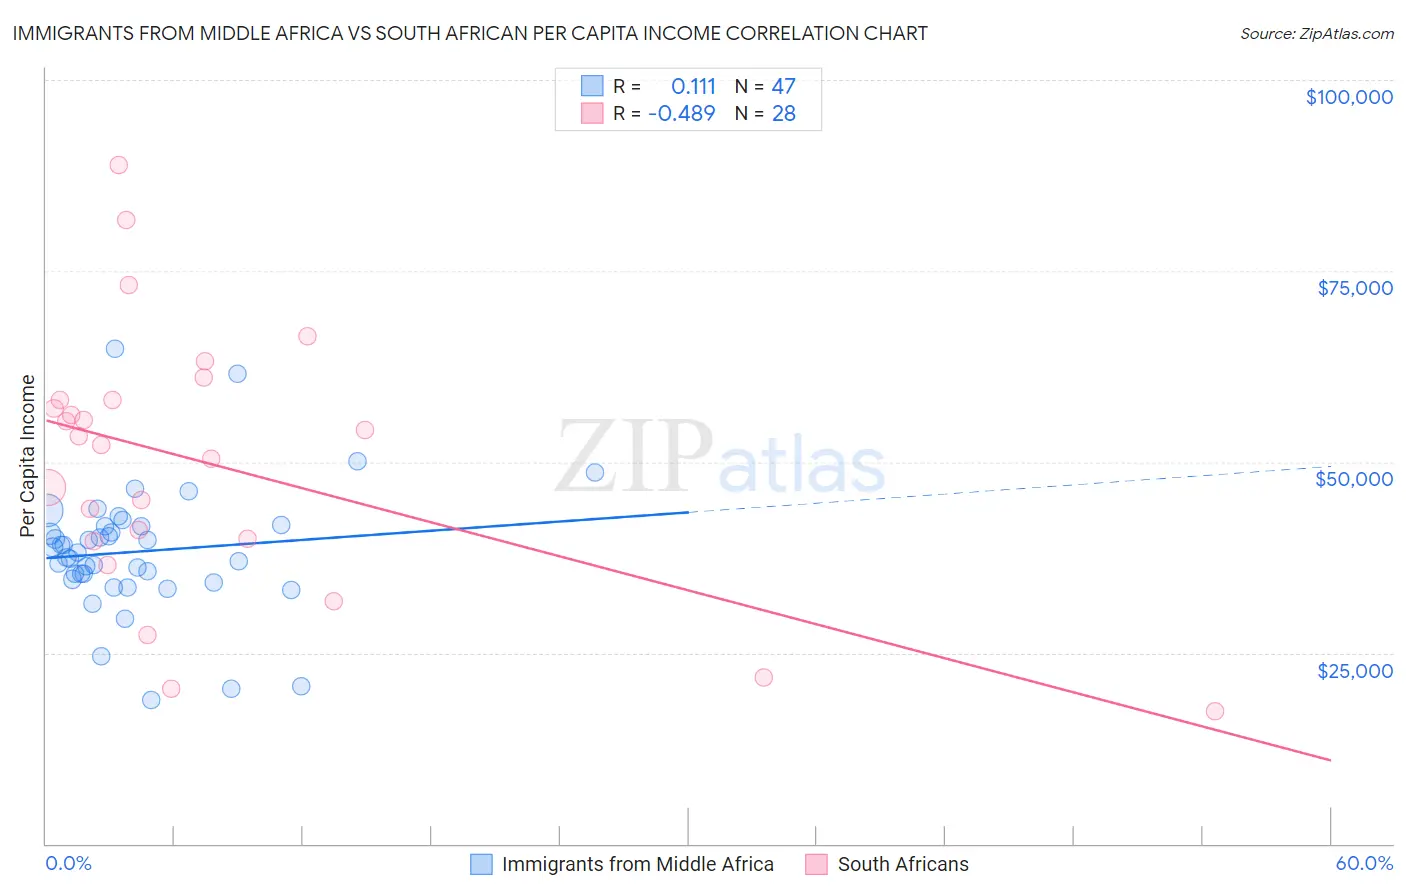 Immigrants from Middle Africa vs South African Per Capita Income